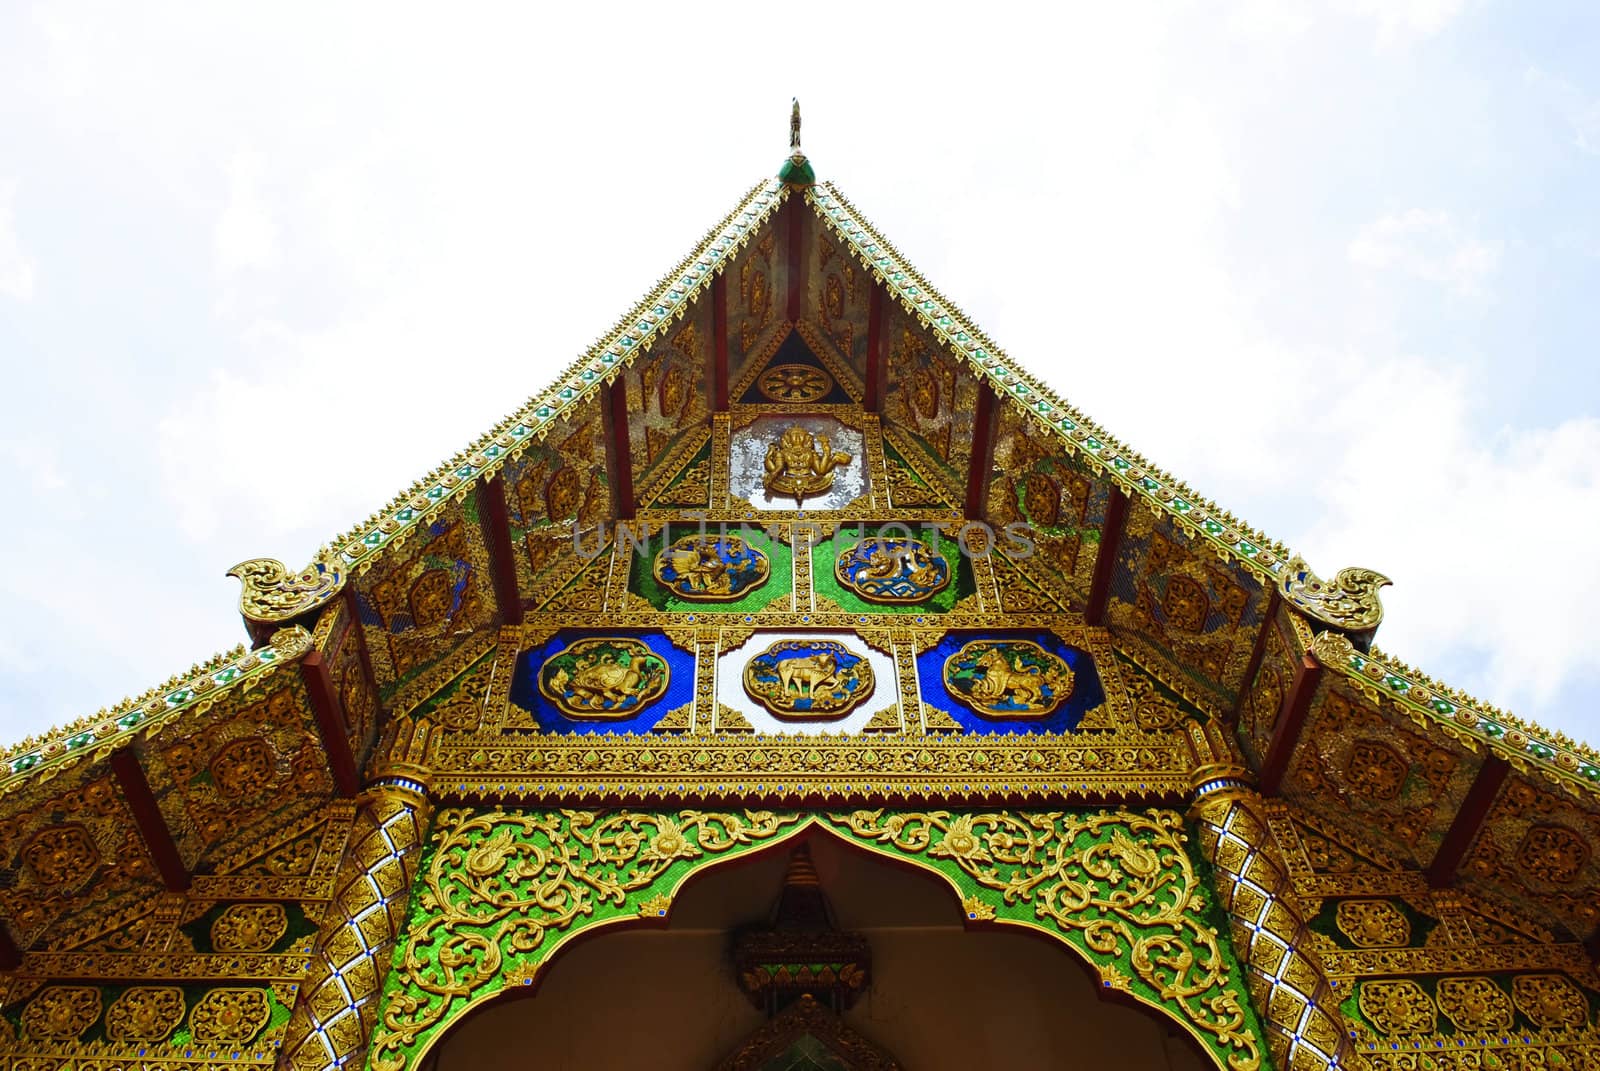 Gable of the church is decorated with images of wild animals Hia by jengit